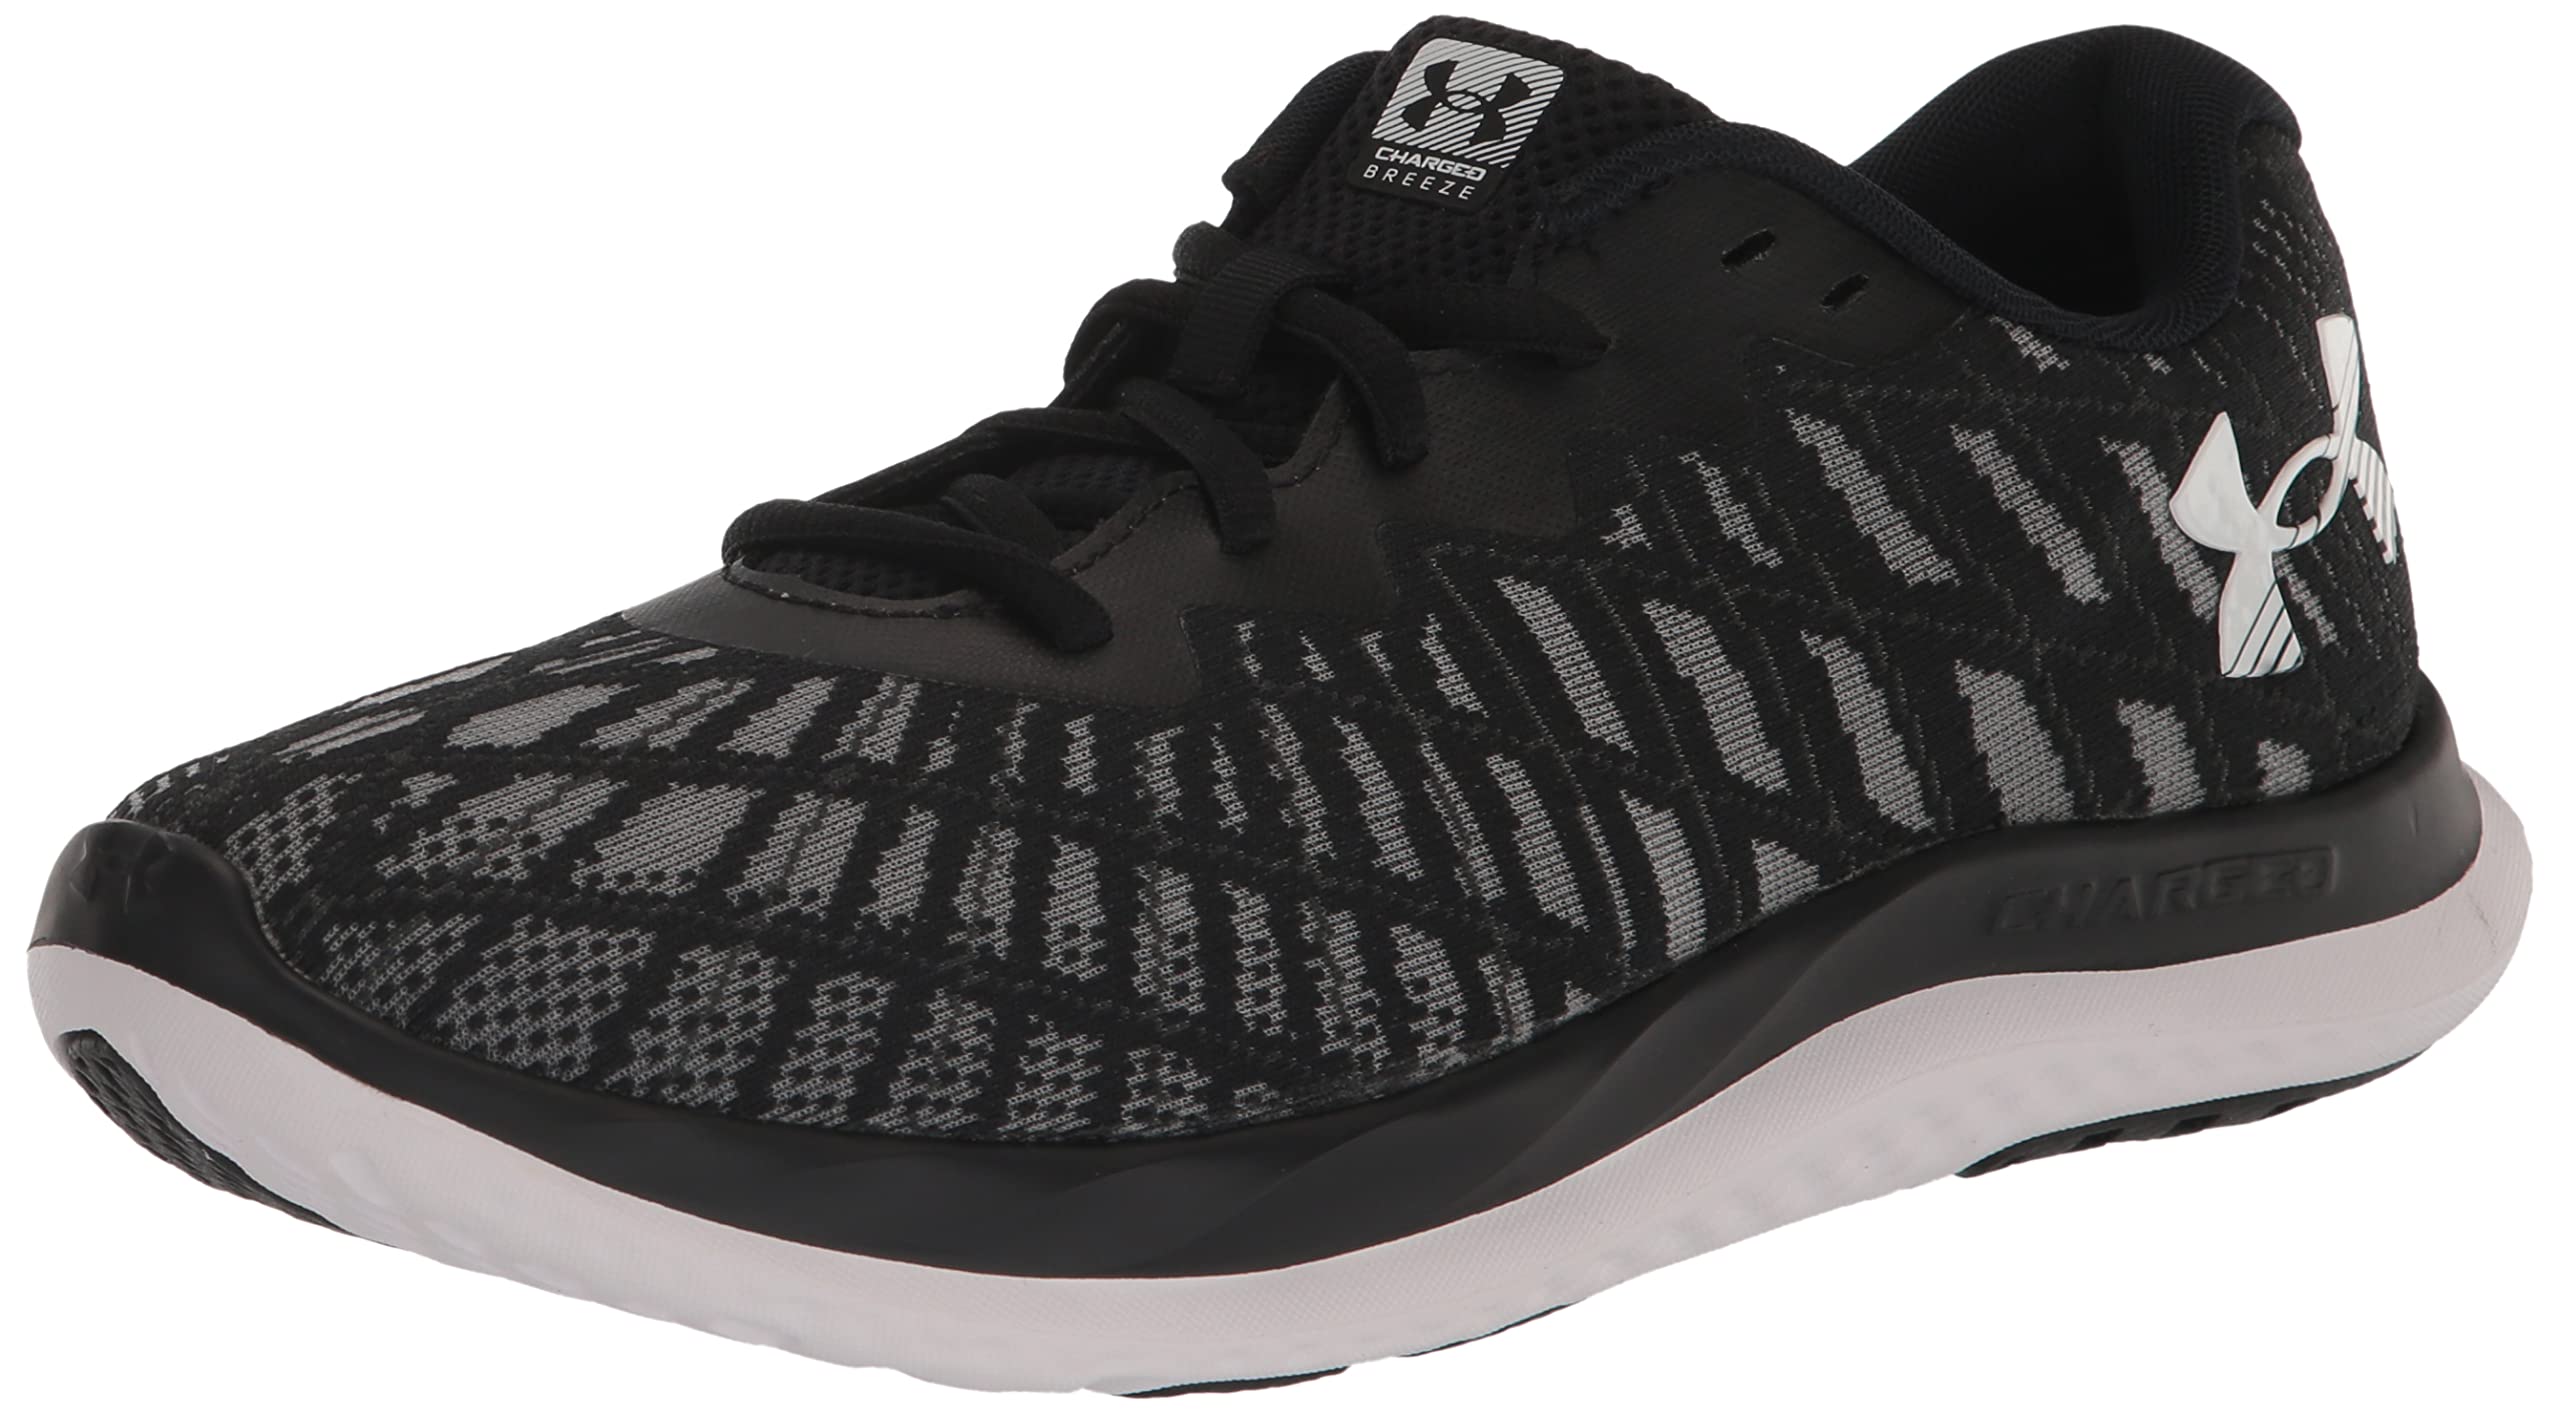 Under Armour Women's Charged Breeze 2 Running Shoe